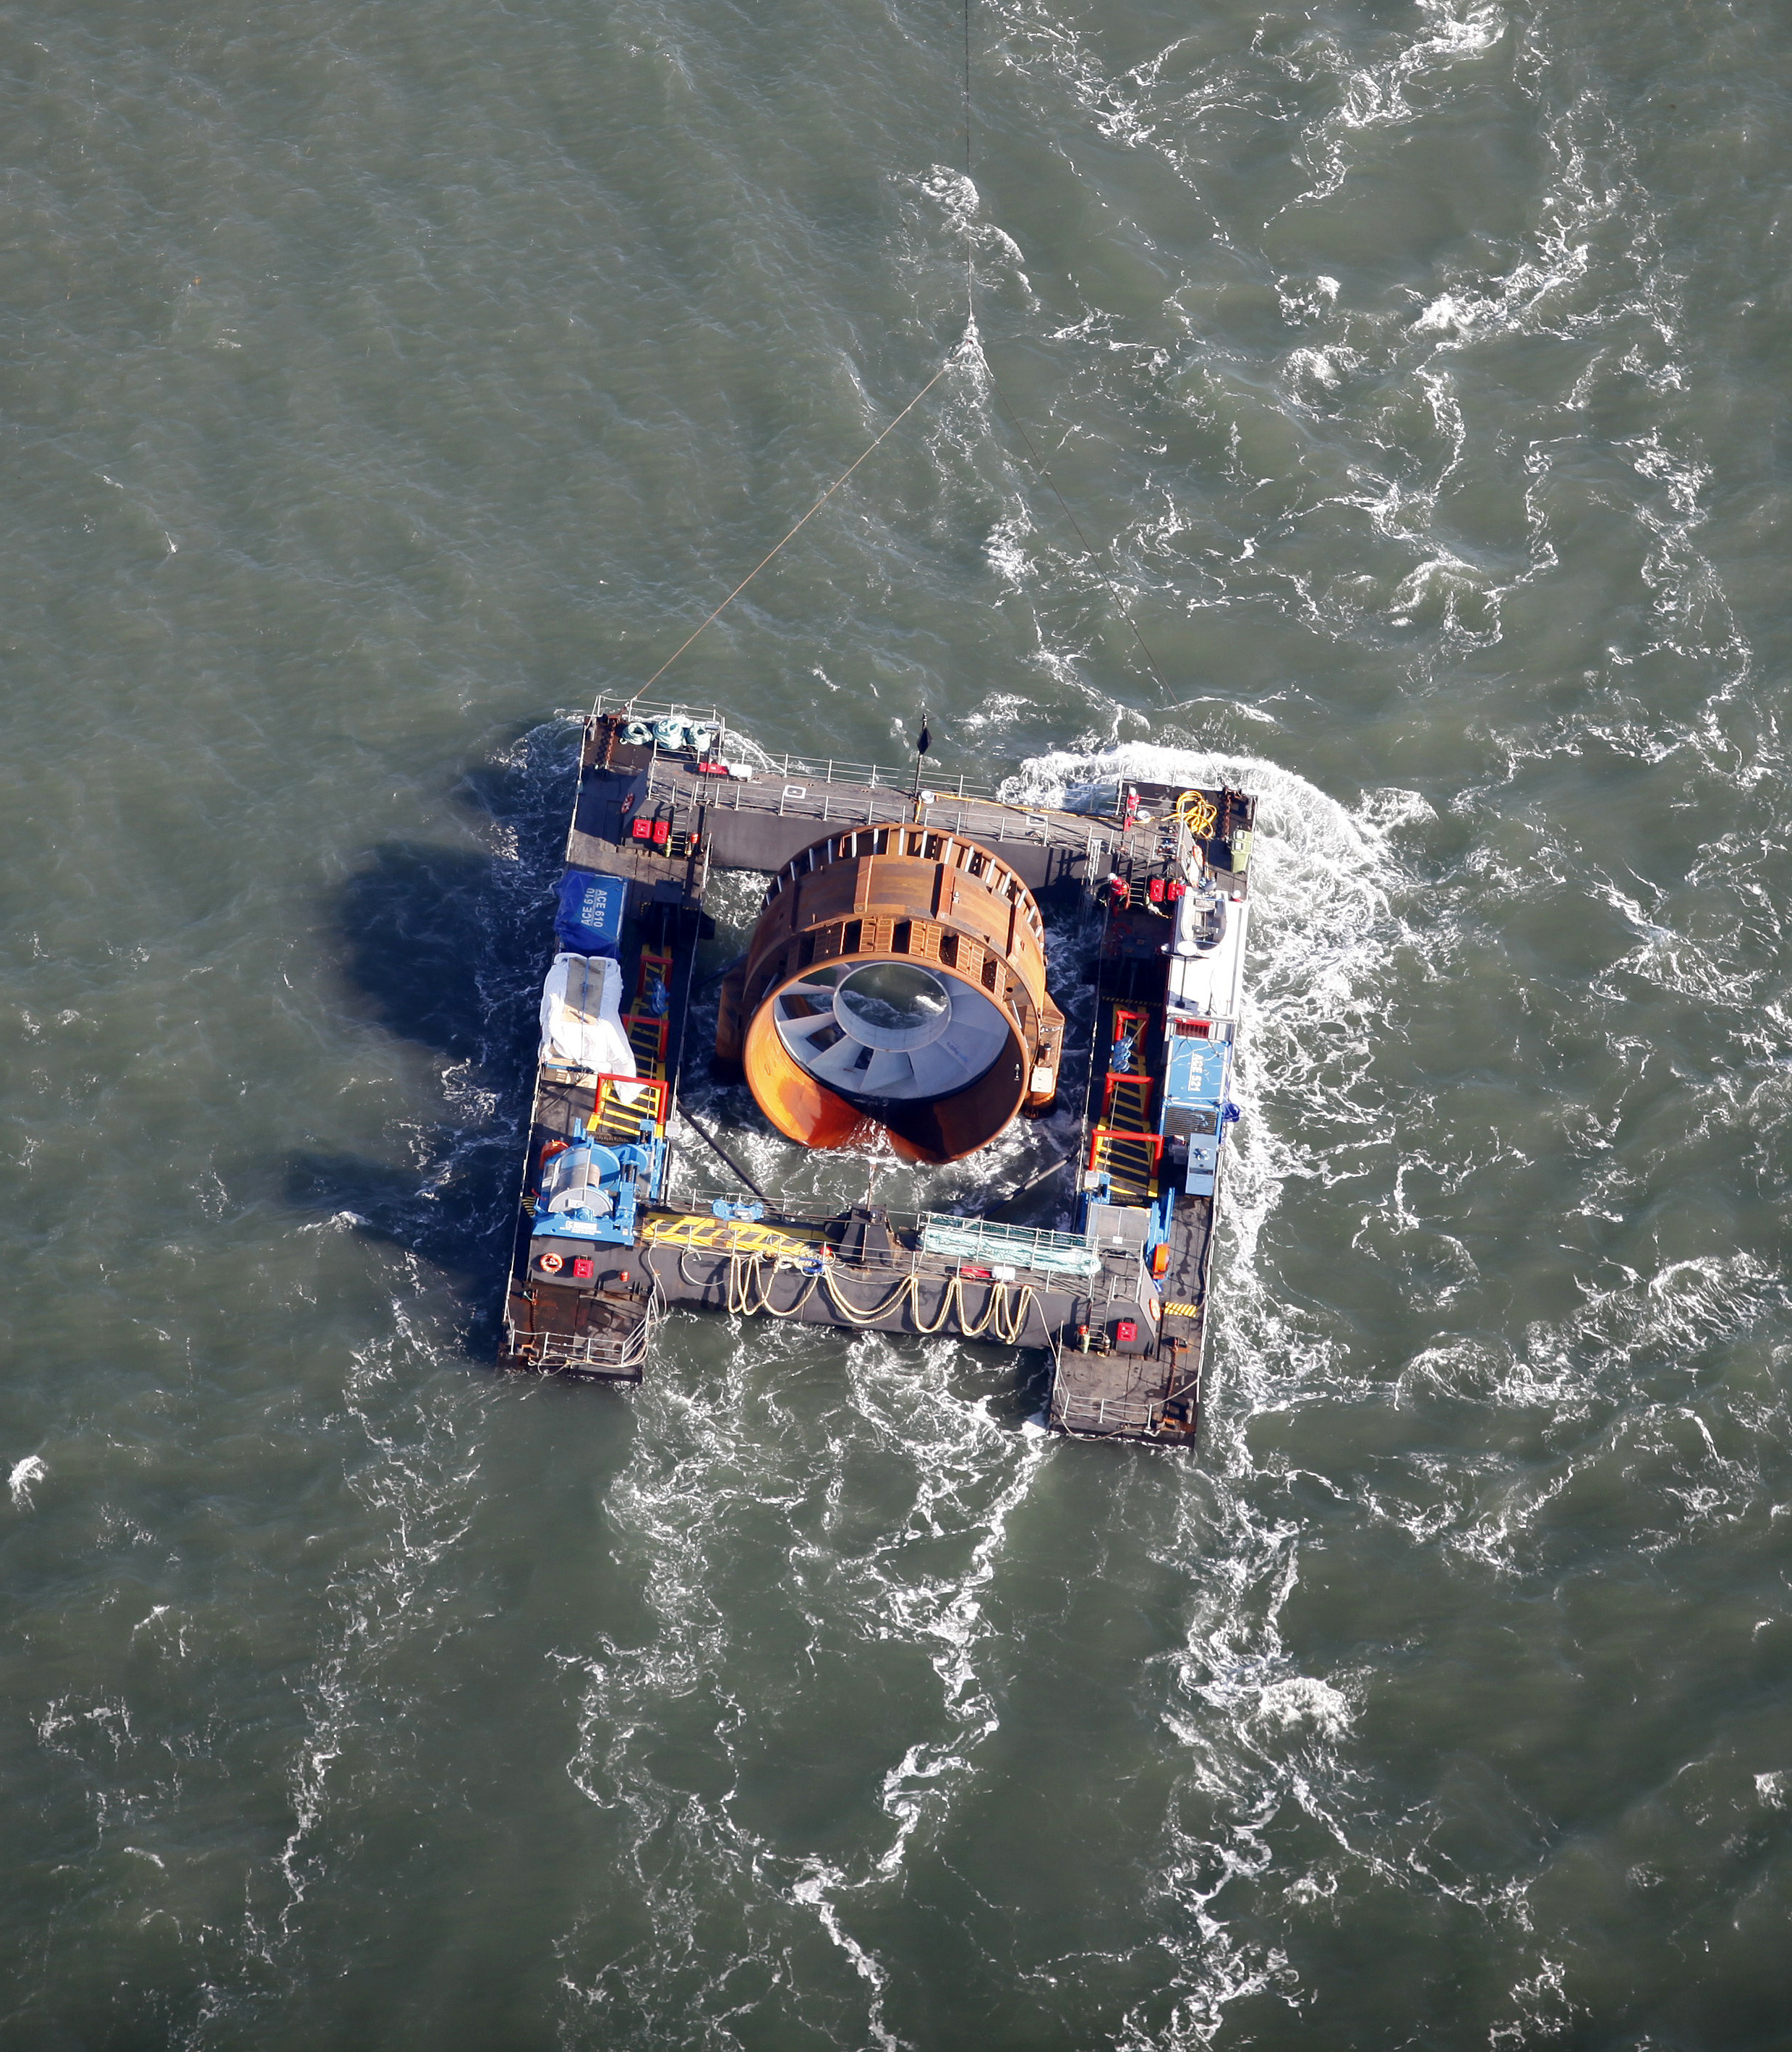 Tidal power companies test waters in Bay of Fundy for renewable energy